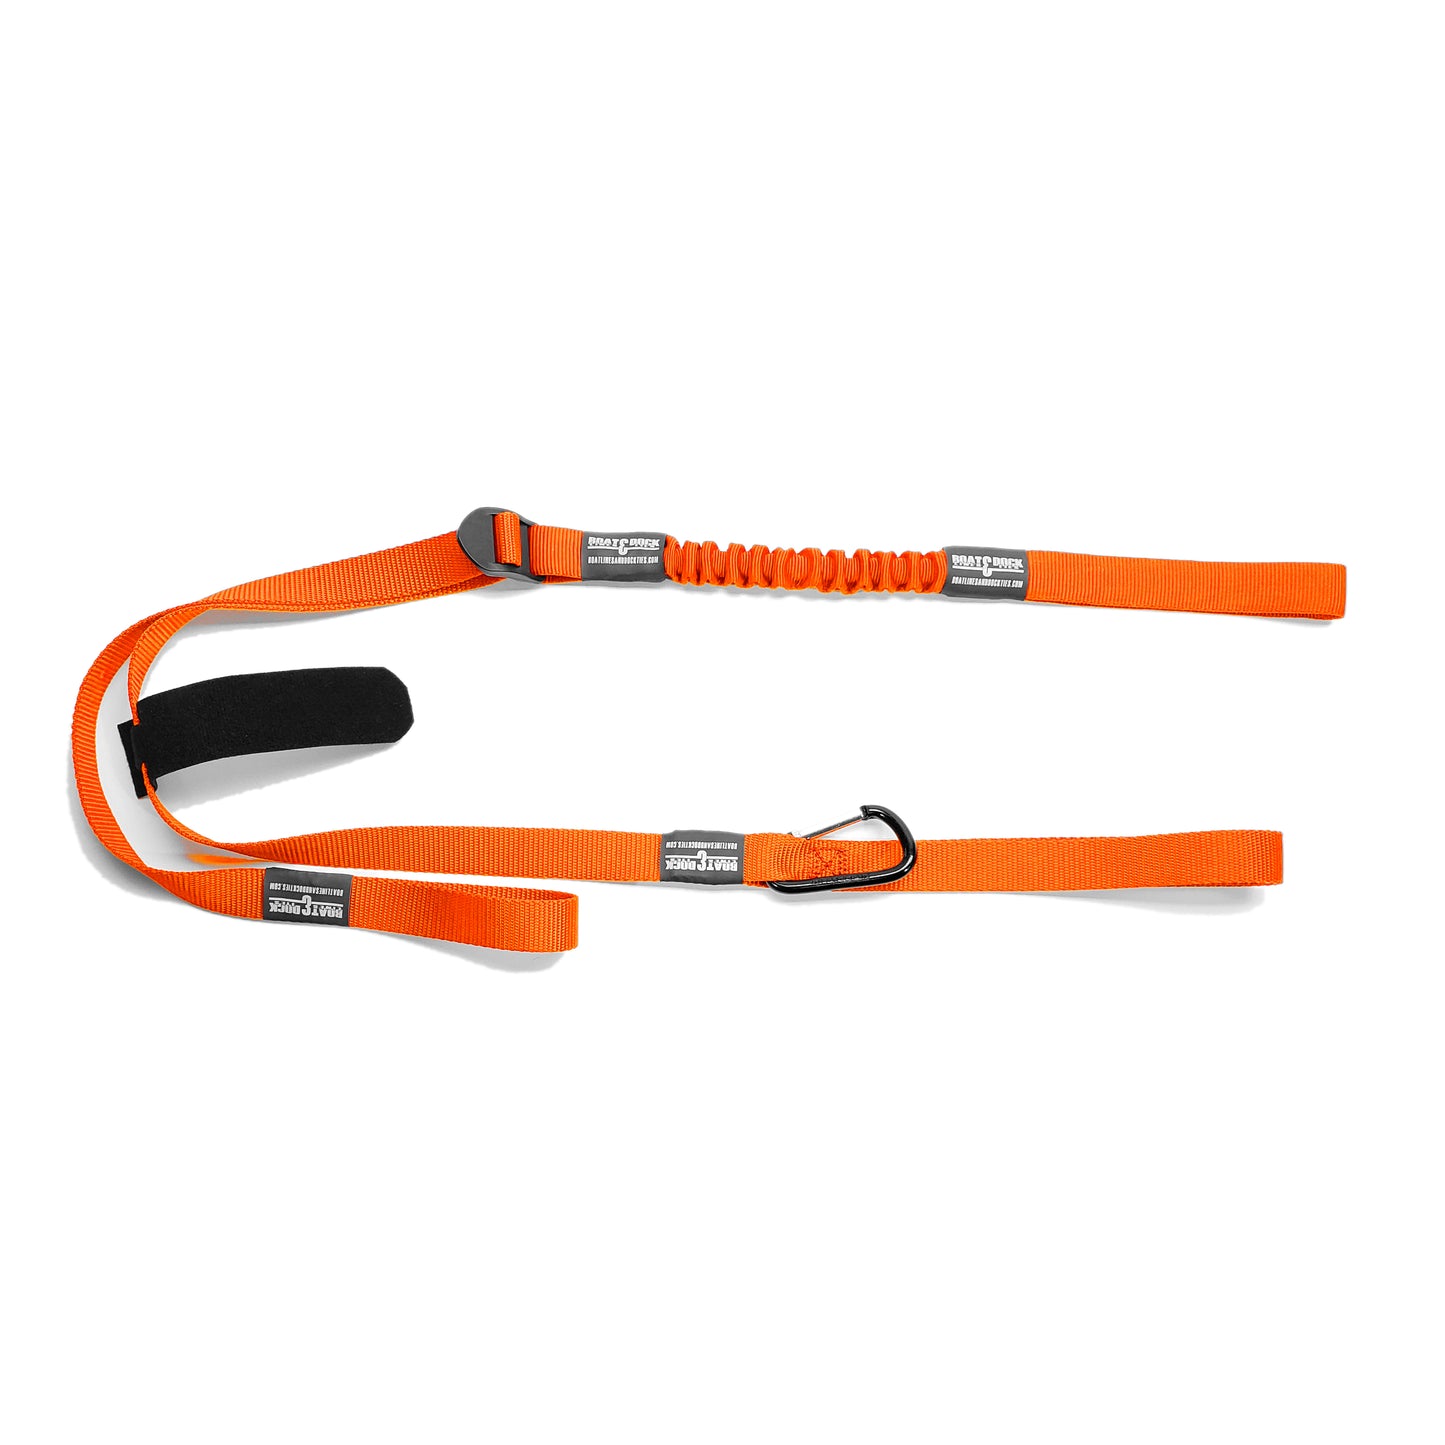 Adjustable Flex Cargo Tie Down Strap (Pack of 2) - For SUP , Kayak, Surf Boards, Floating Mats and Cargo